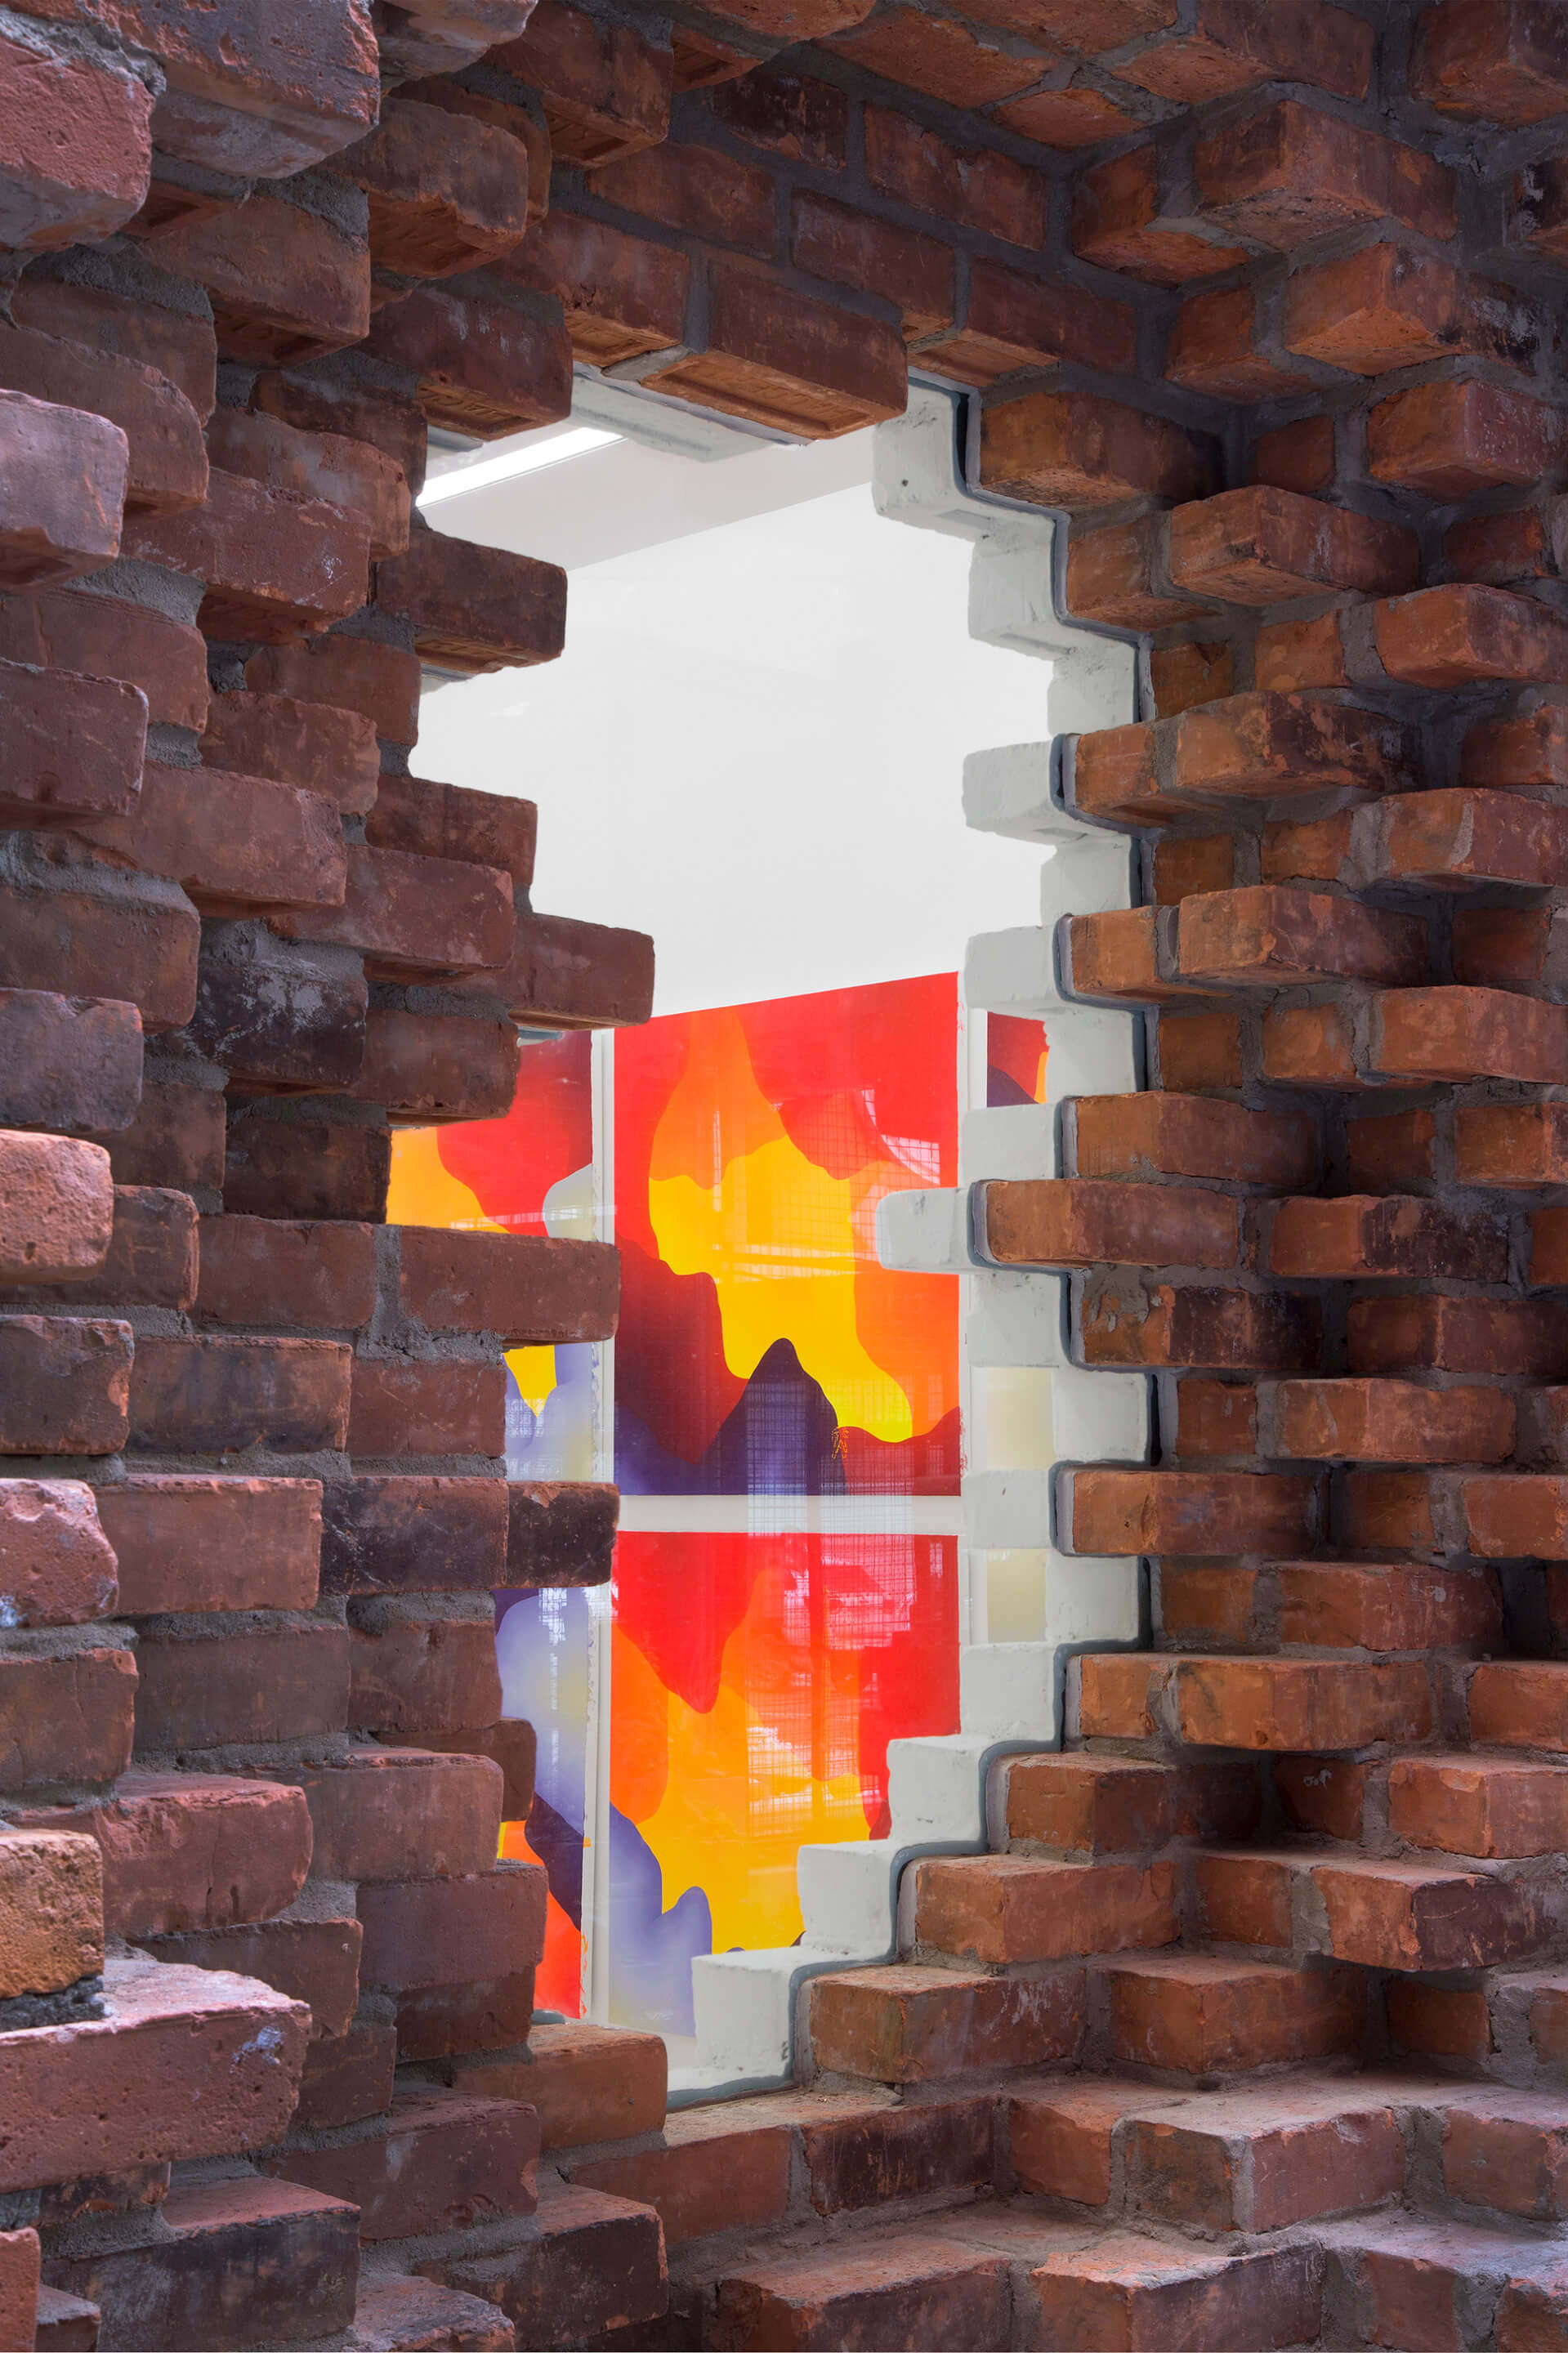 view inside of a gallery from a brick opening